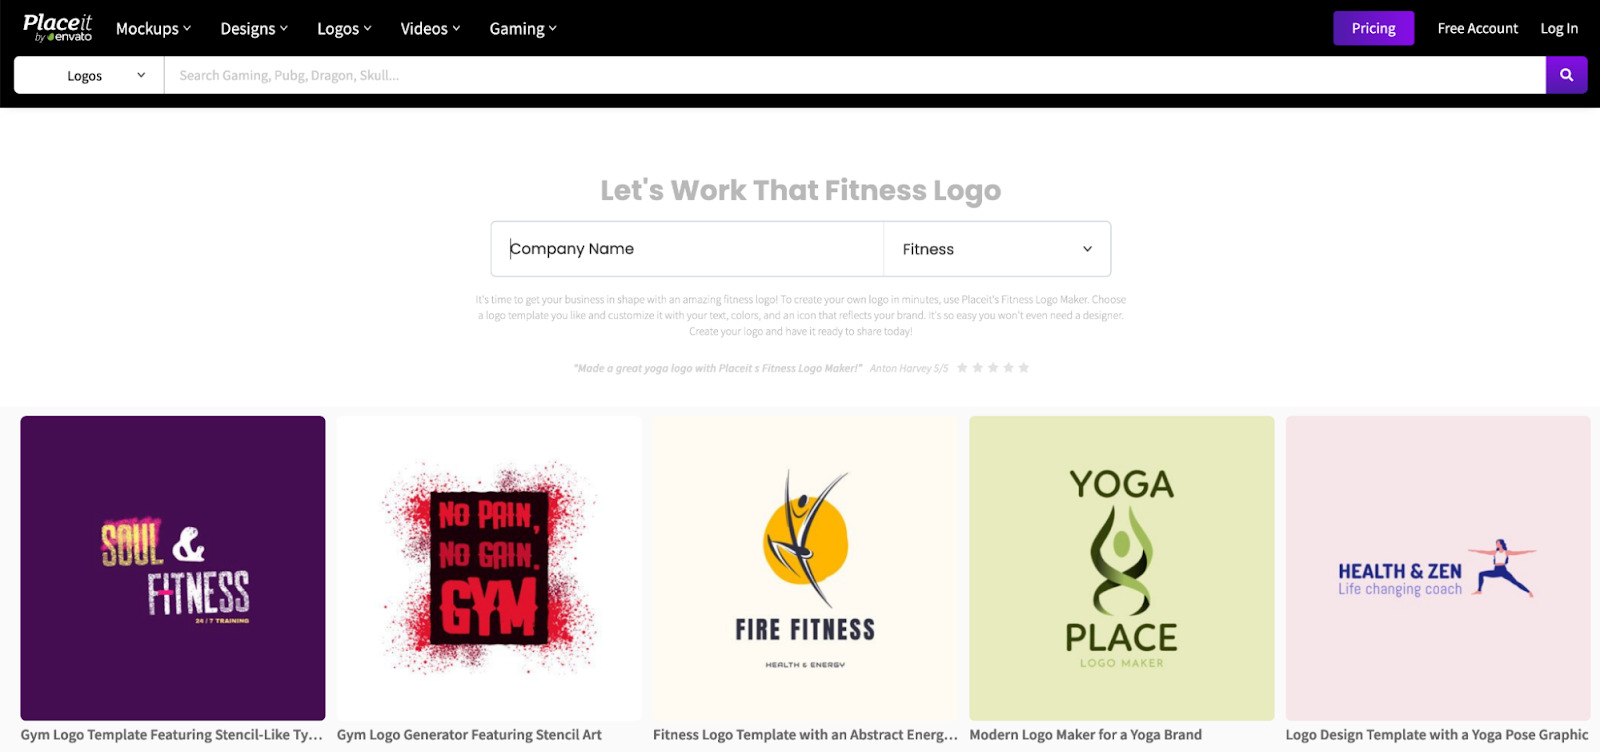 Excerpt of webpage. Short paragraphs. Majority of page is fitness logos in grid format